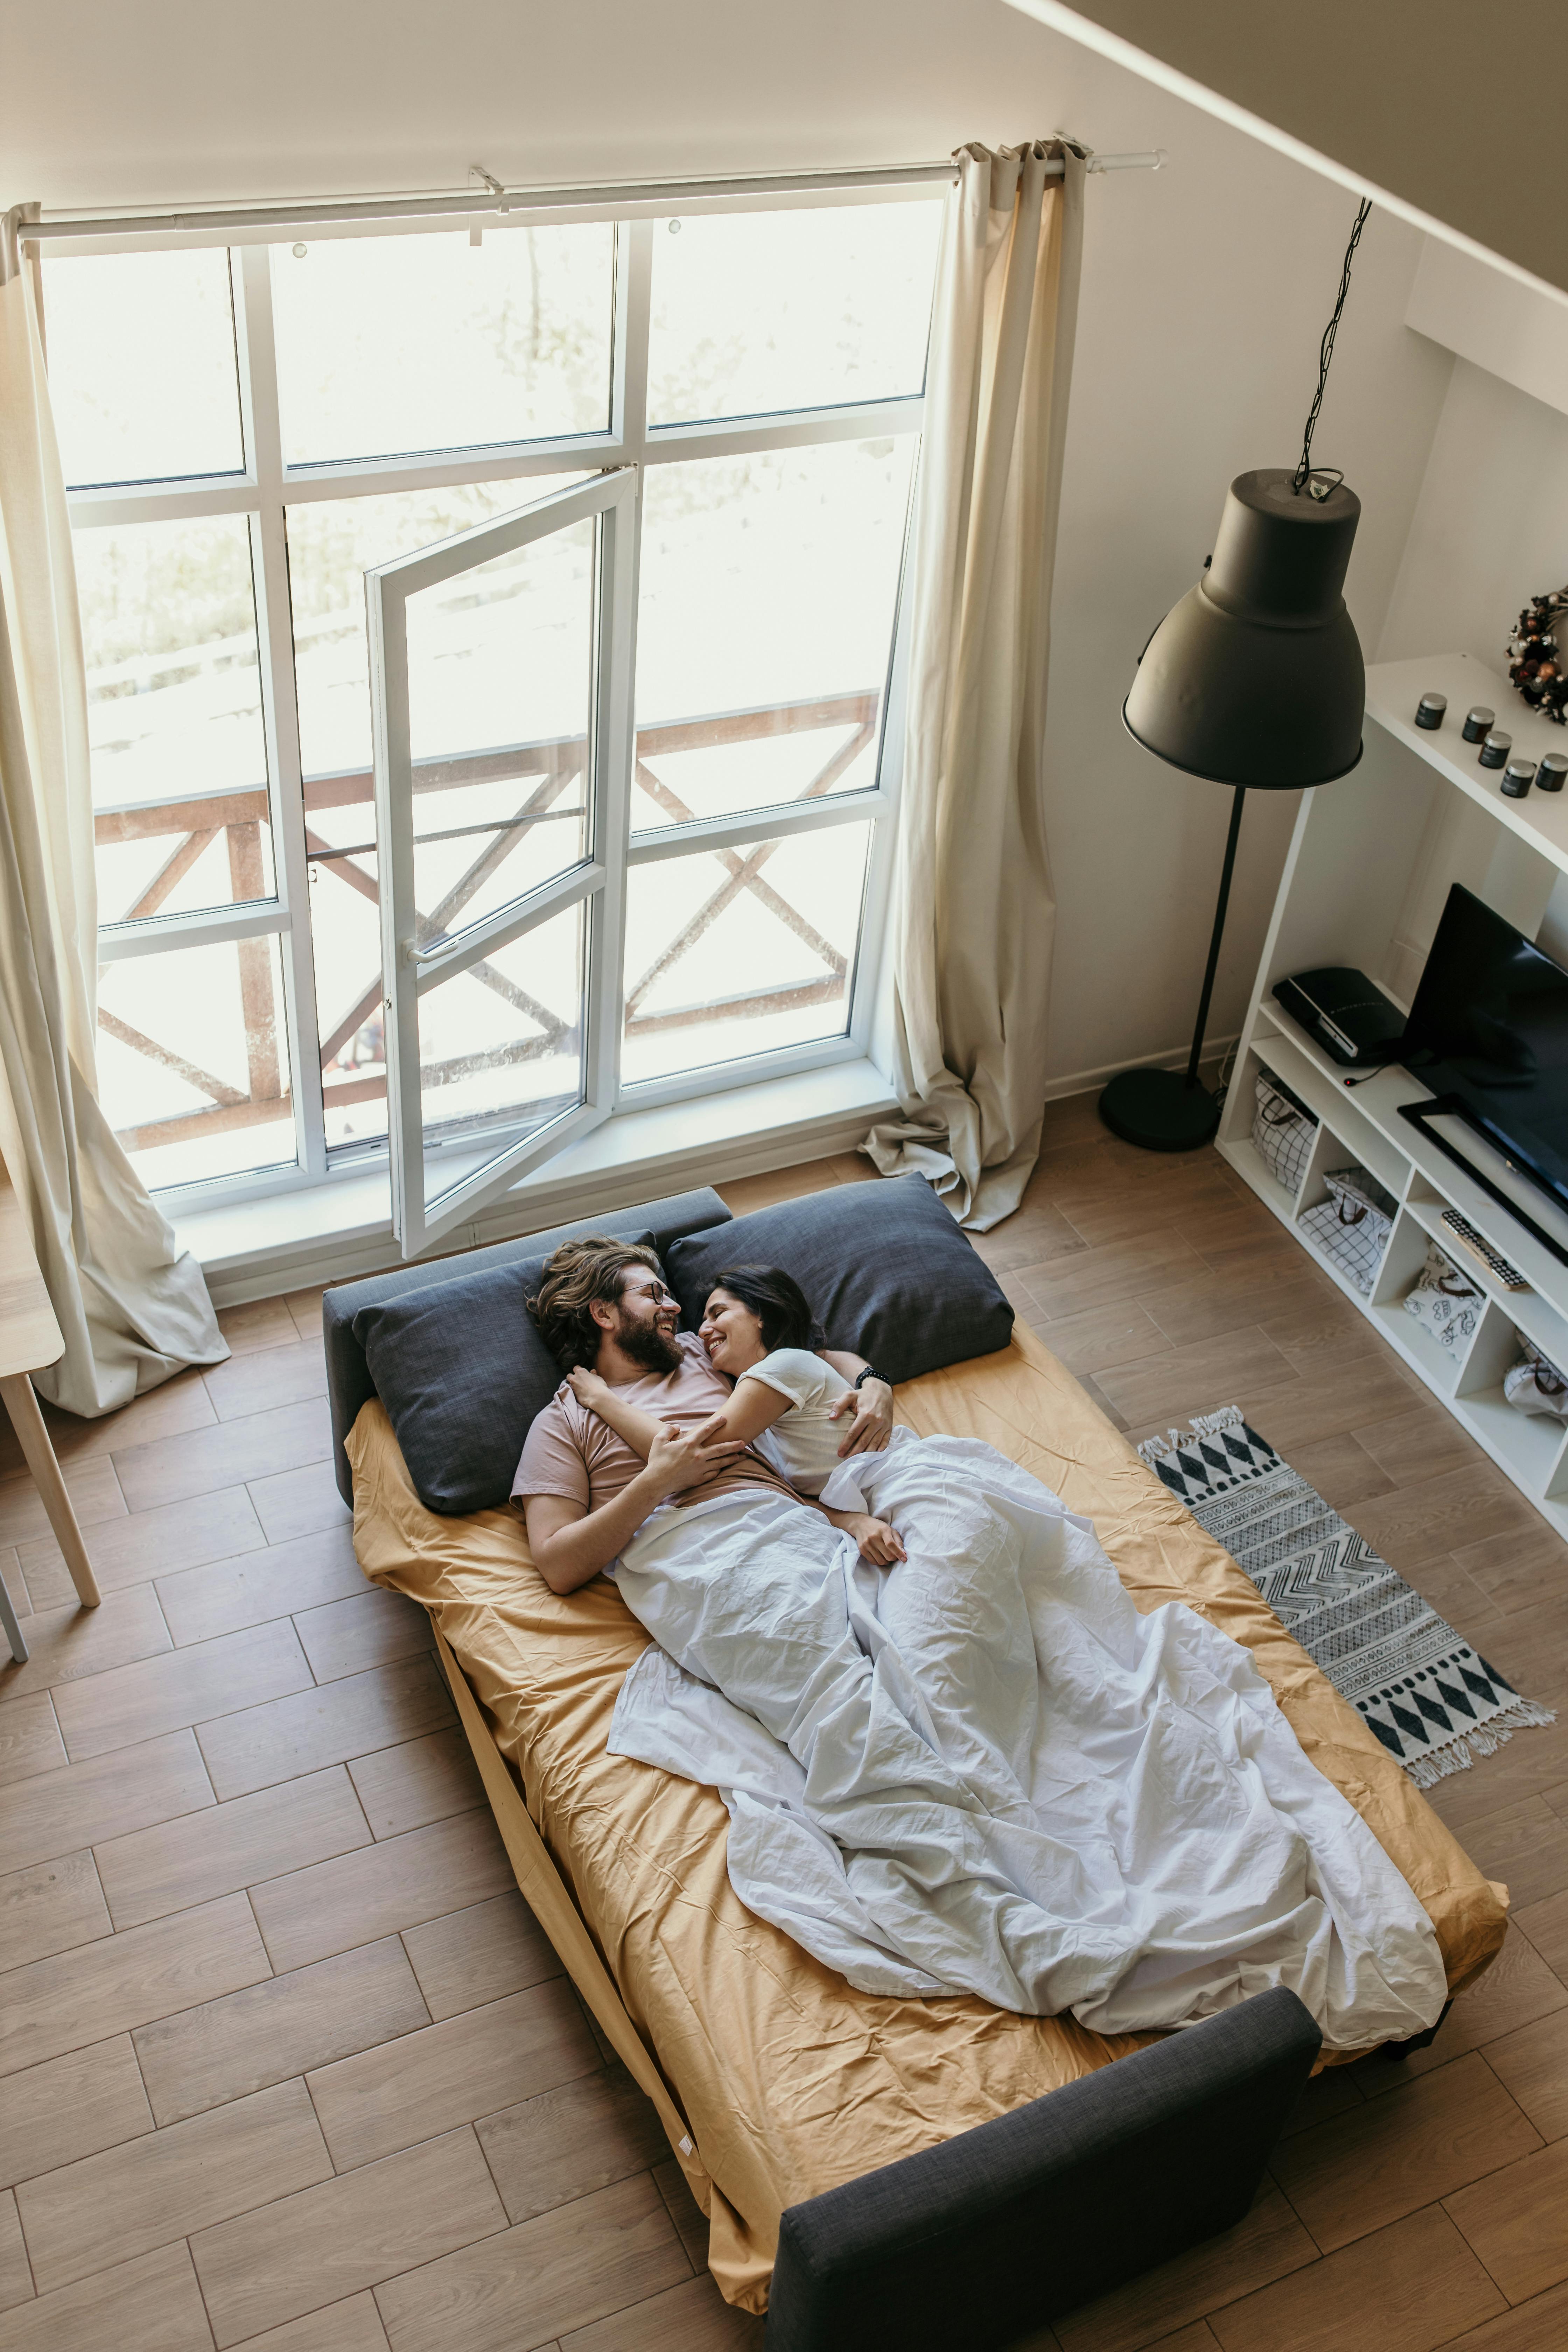 A happy couple laying in bed | Source: Pexels